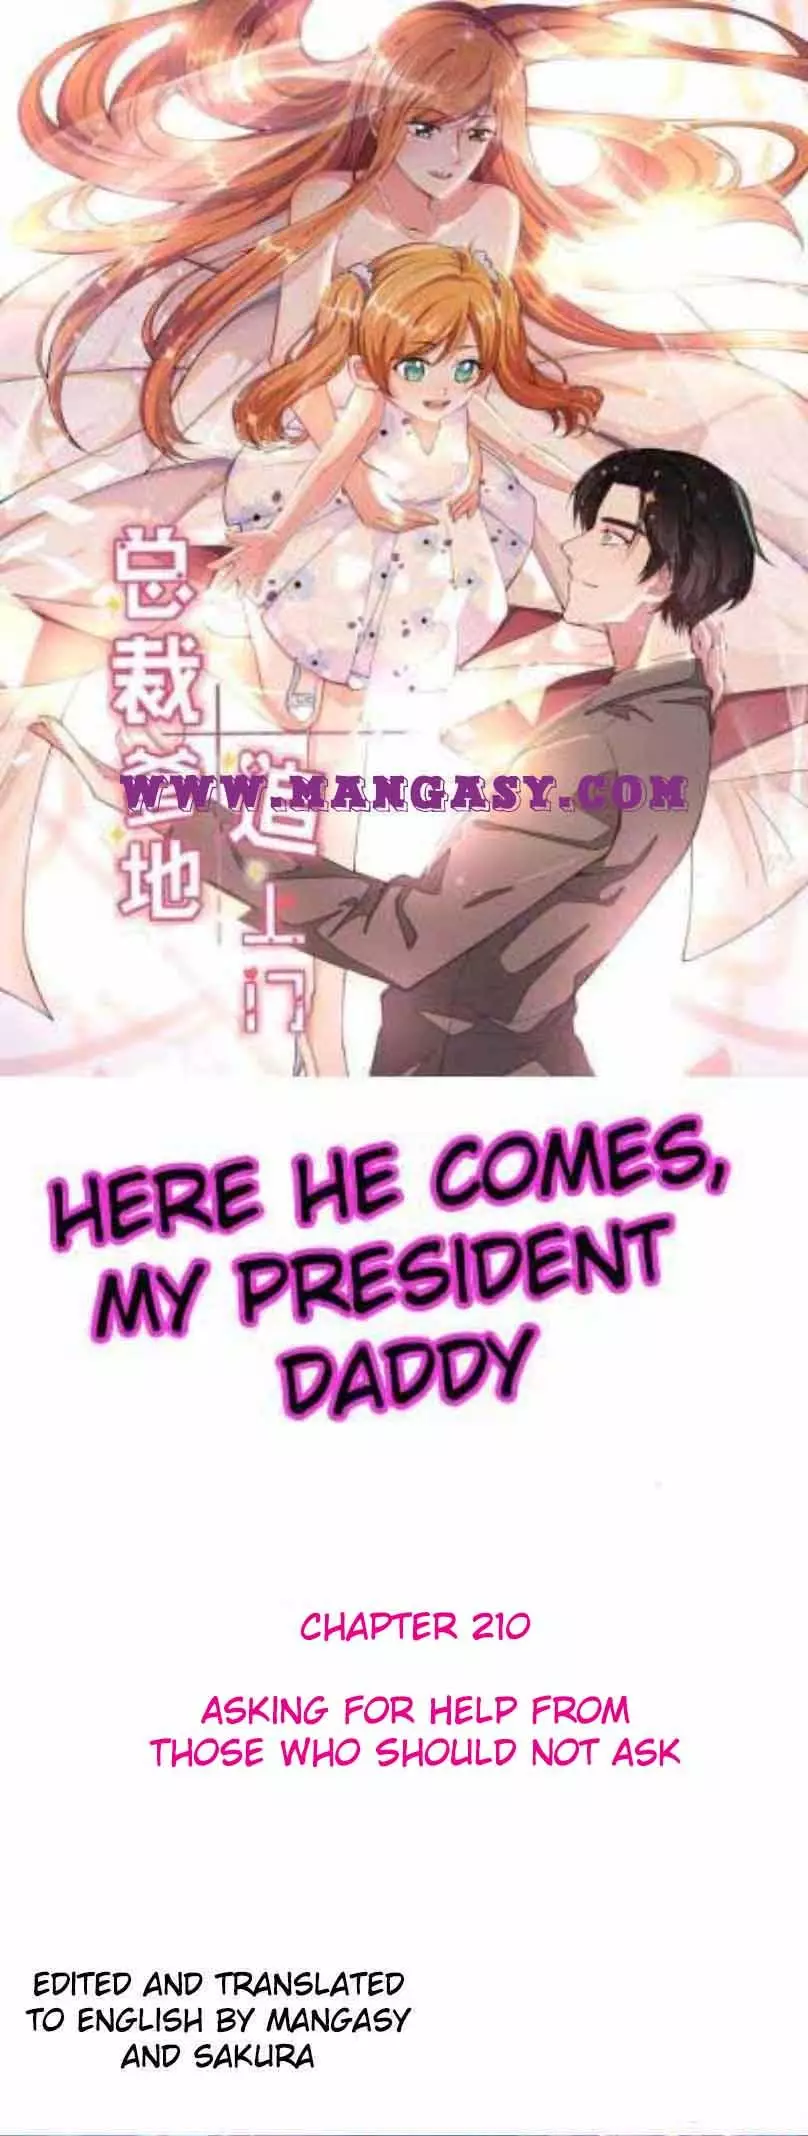 President Daddy Is Chasing You - 210 page 1-2250bedb